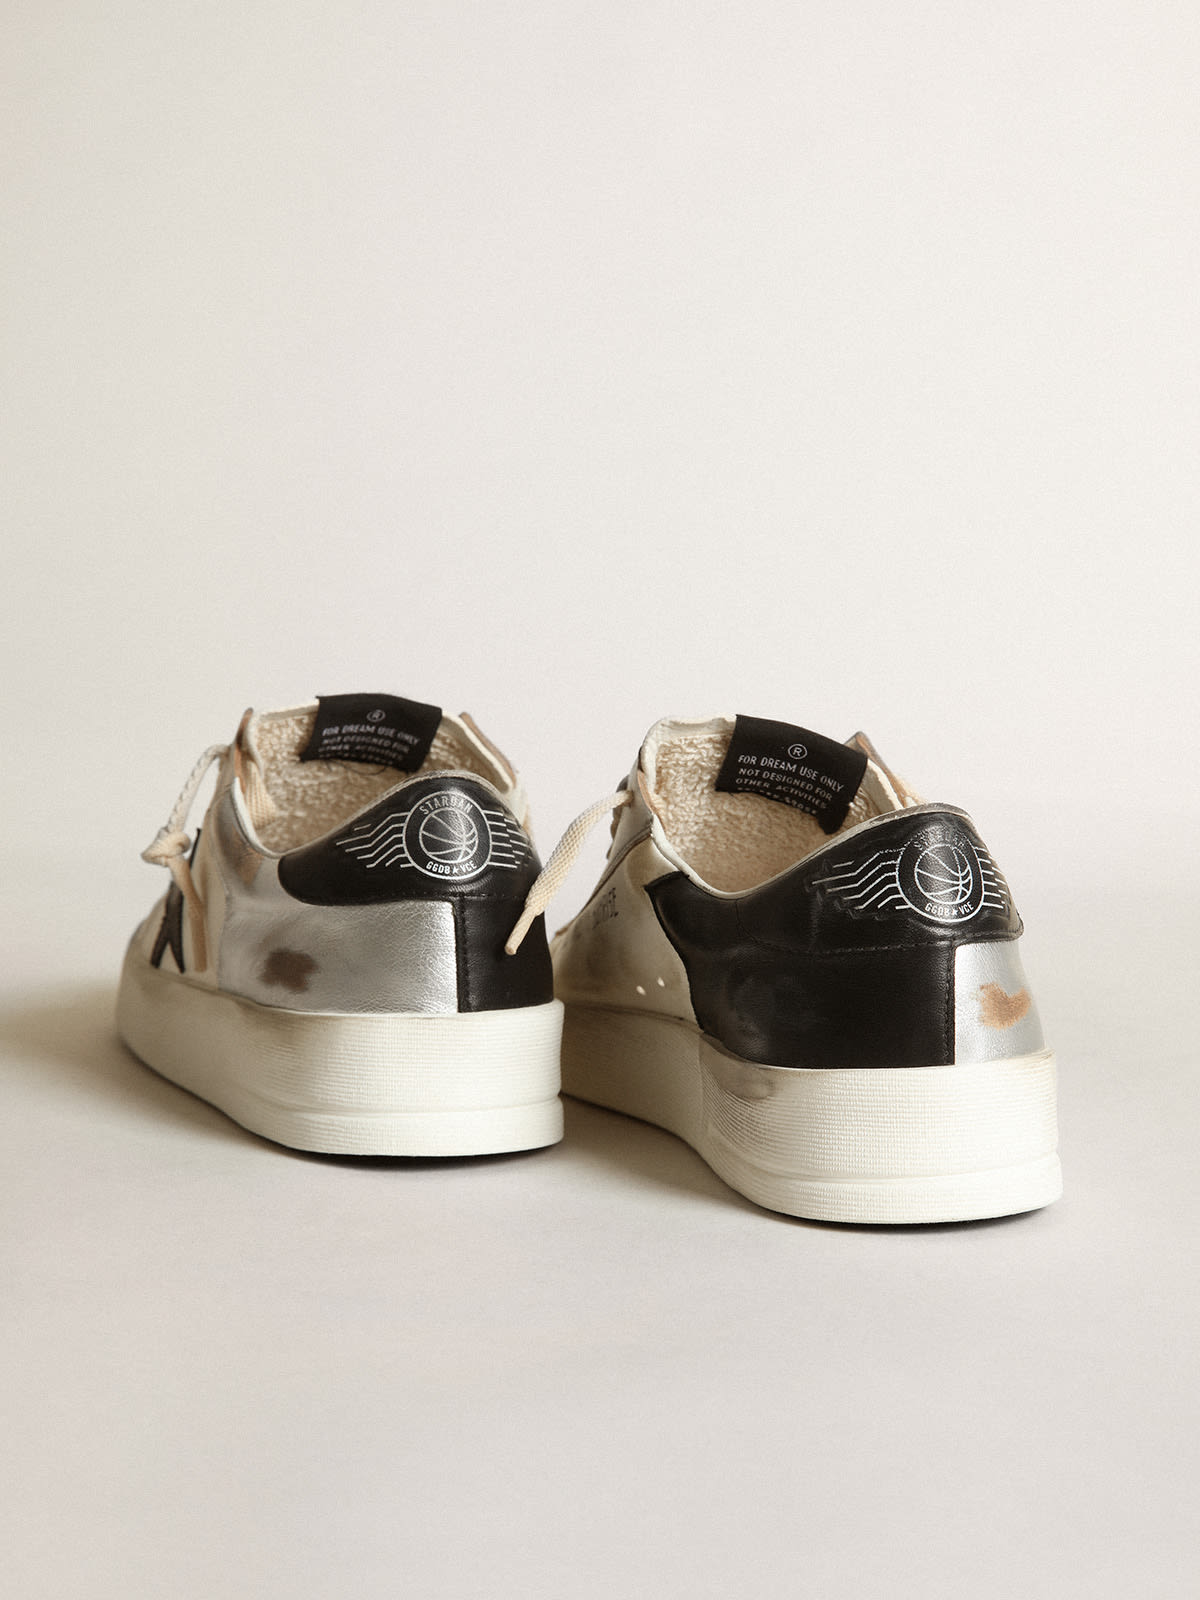 Golden Goose - Women’s Stardan sneakers in silver laminated leather with white nappa leather inserts and a black leather star in 